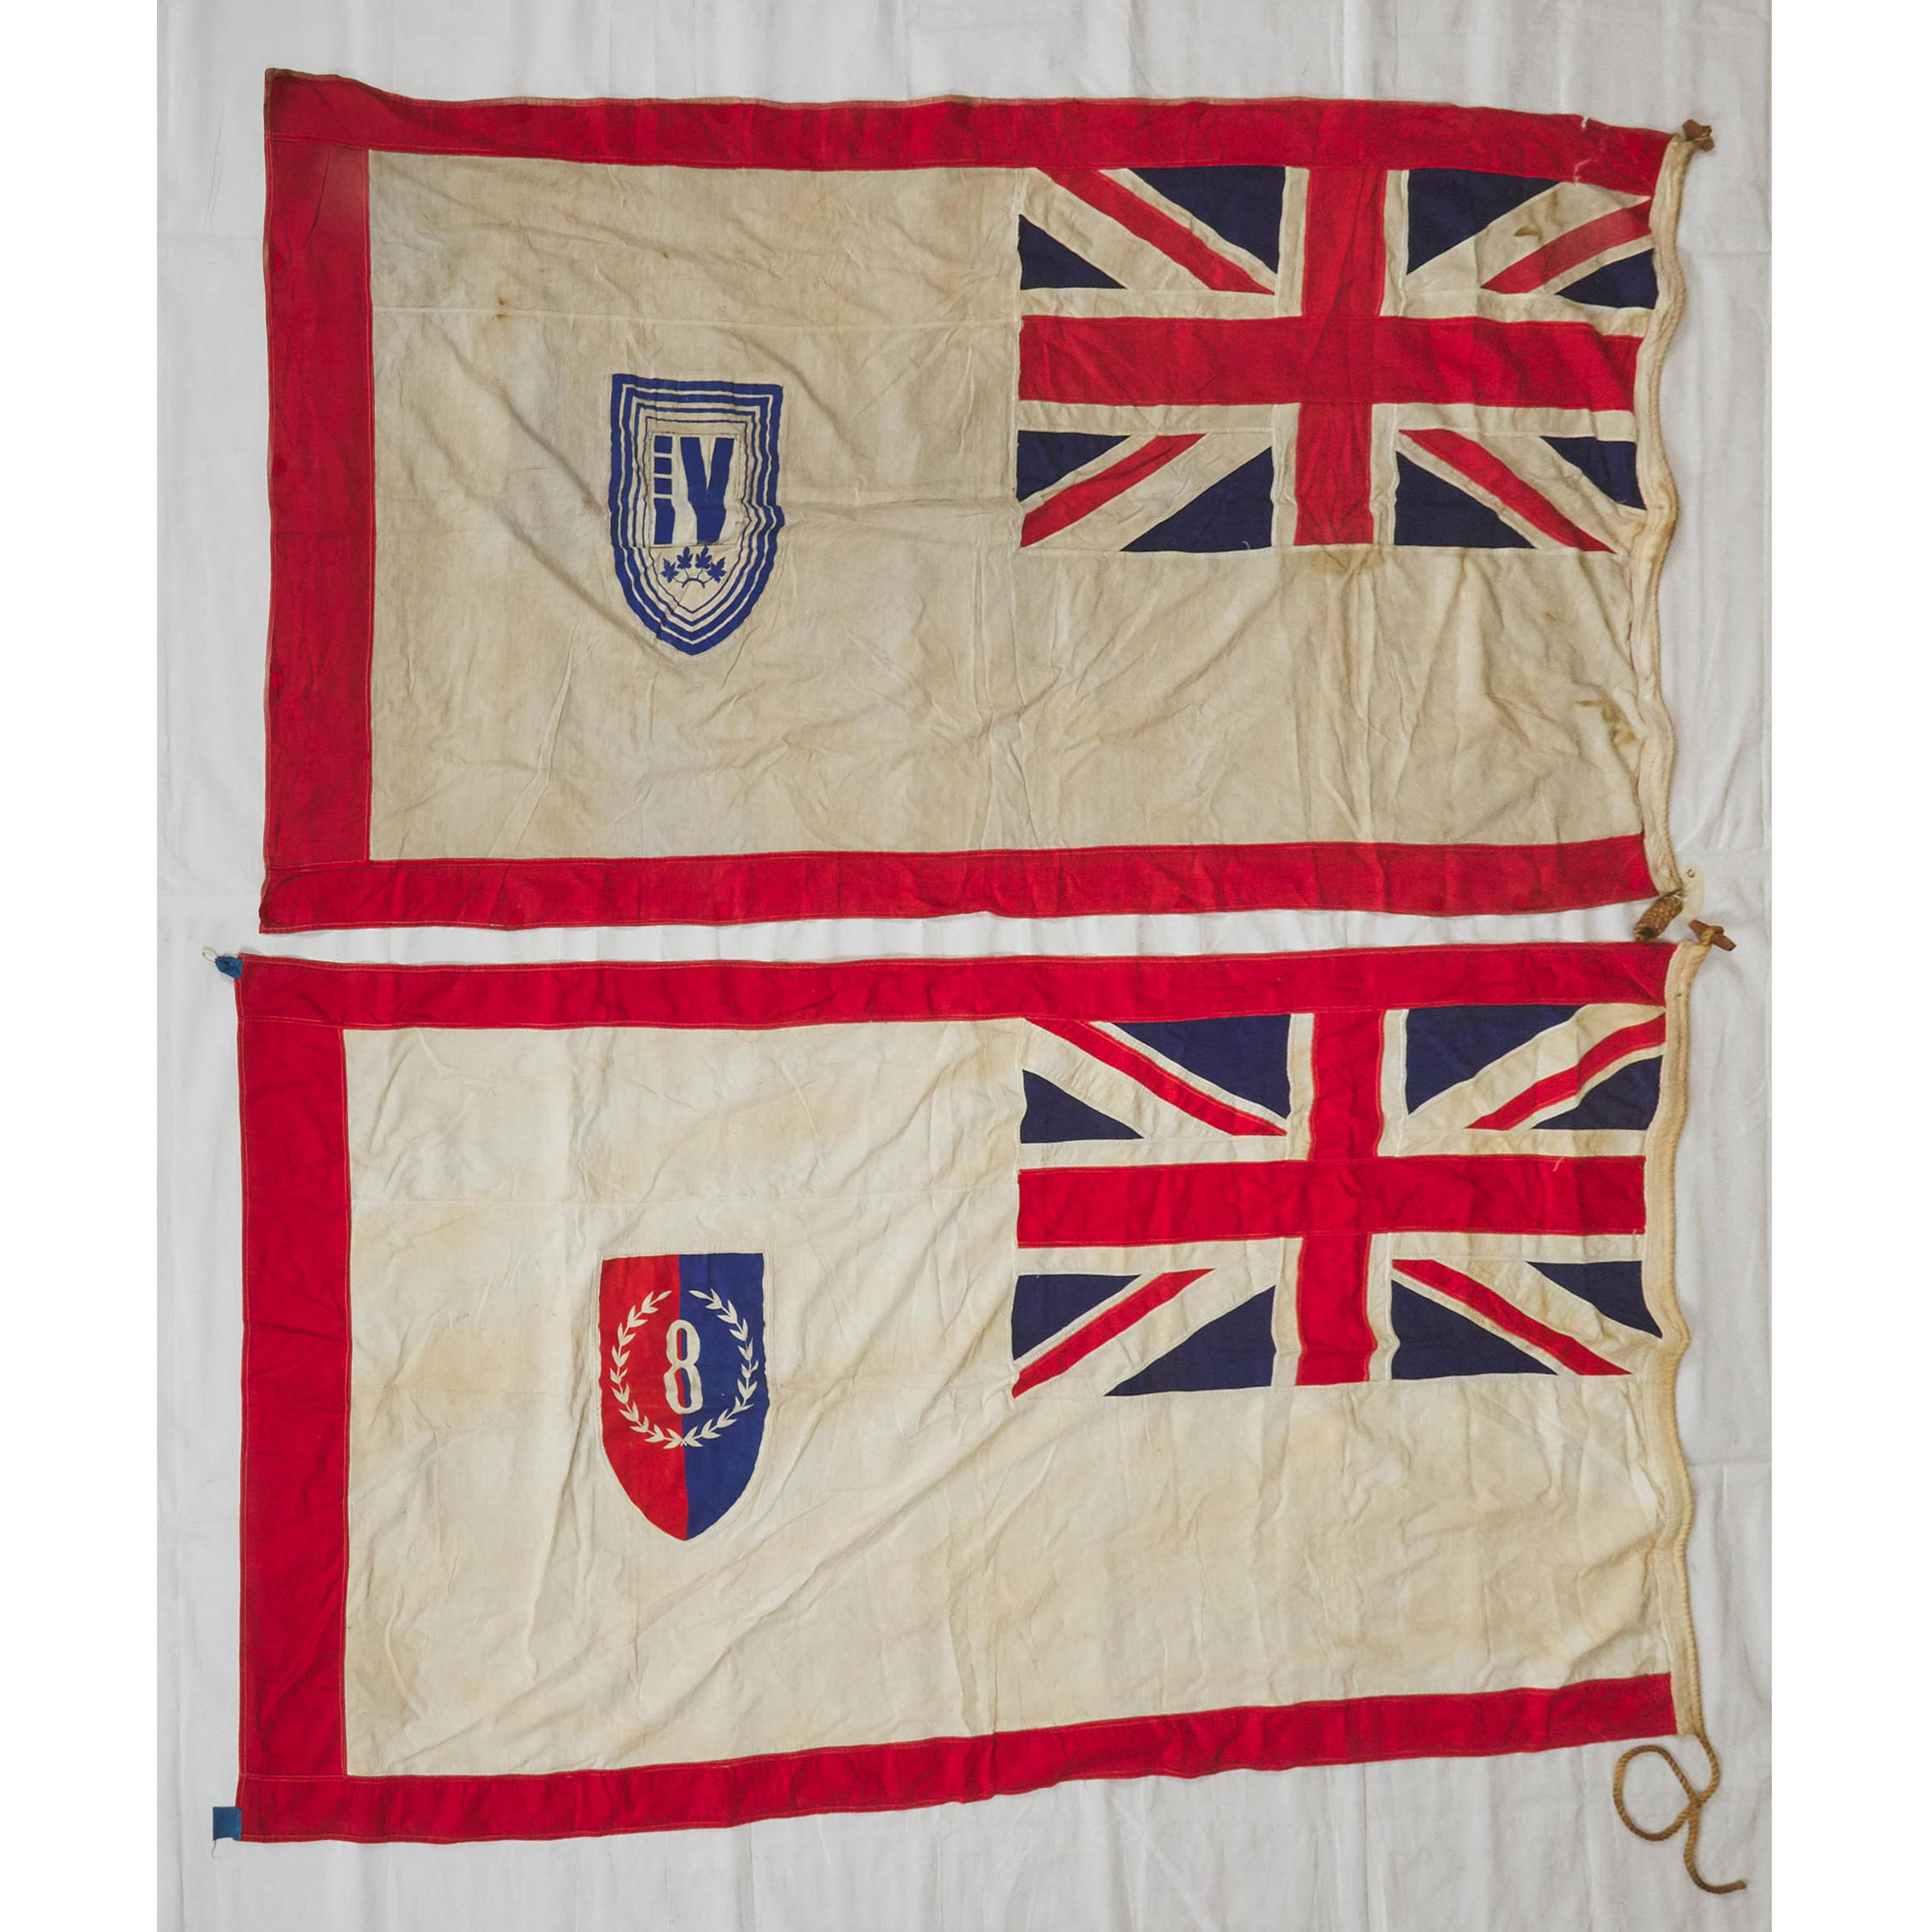 Two WWII Era Canadian Victory Loan Flags, 4th and 8th Campaigns, 1943 and 1945